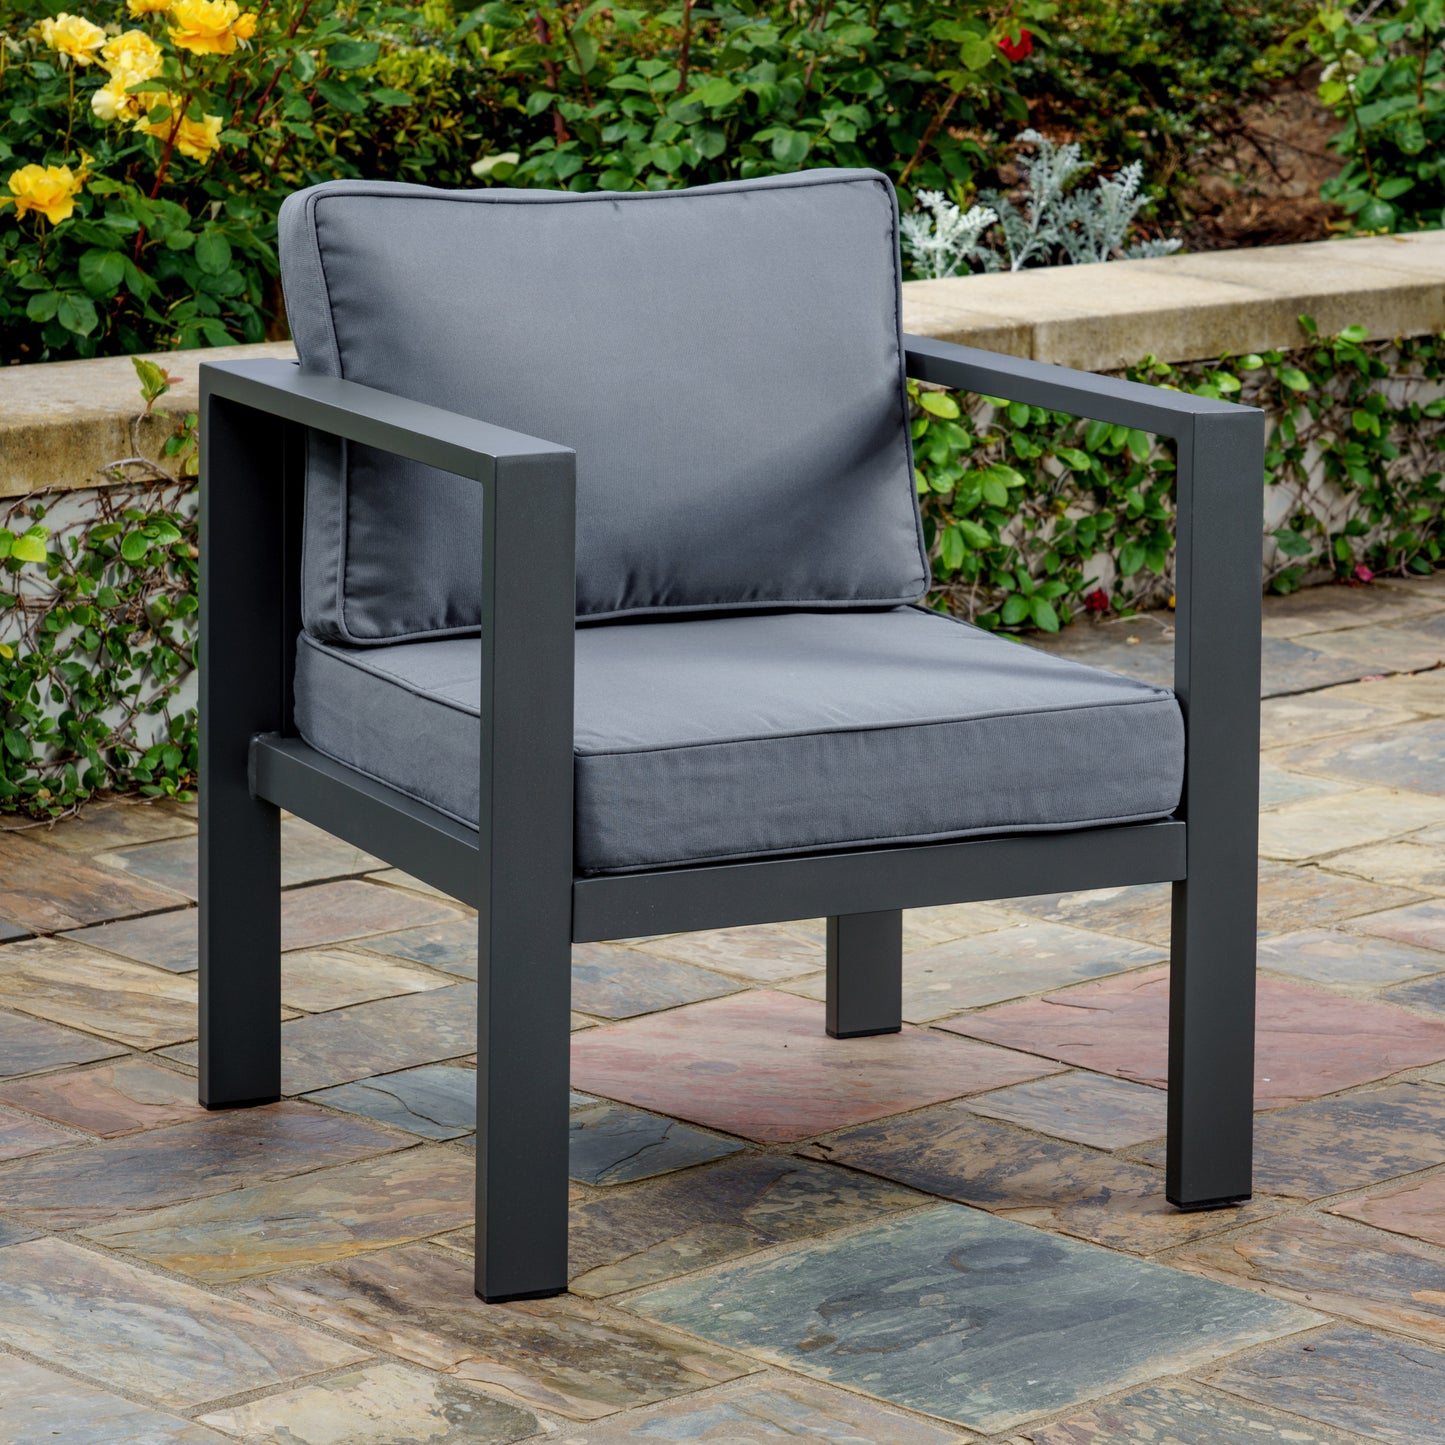 Lakeview Aluminum Chair Set (2 Chairs & 2 Ottomans) - Charcoal